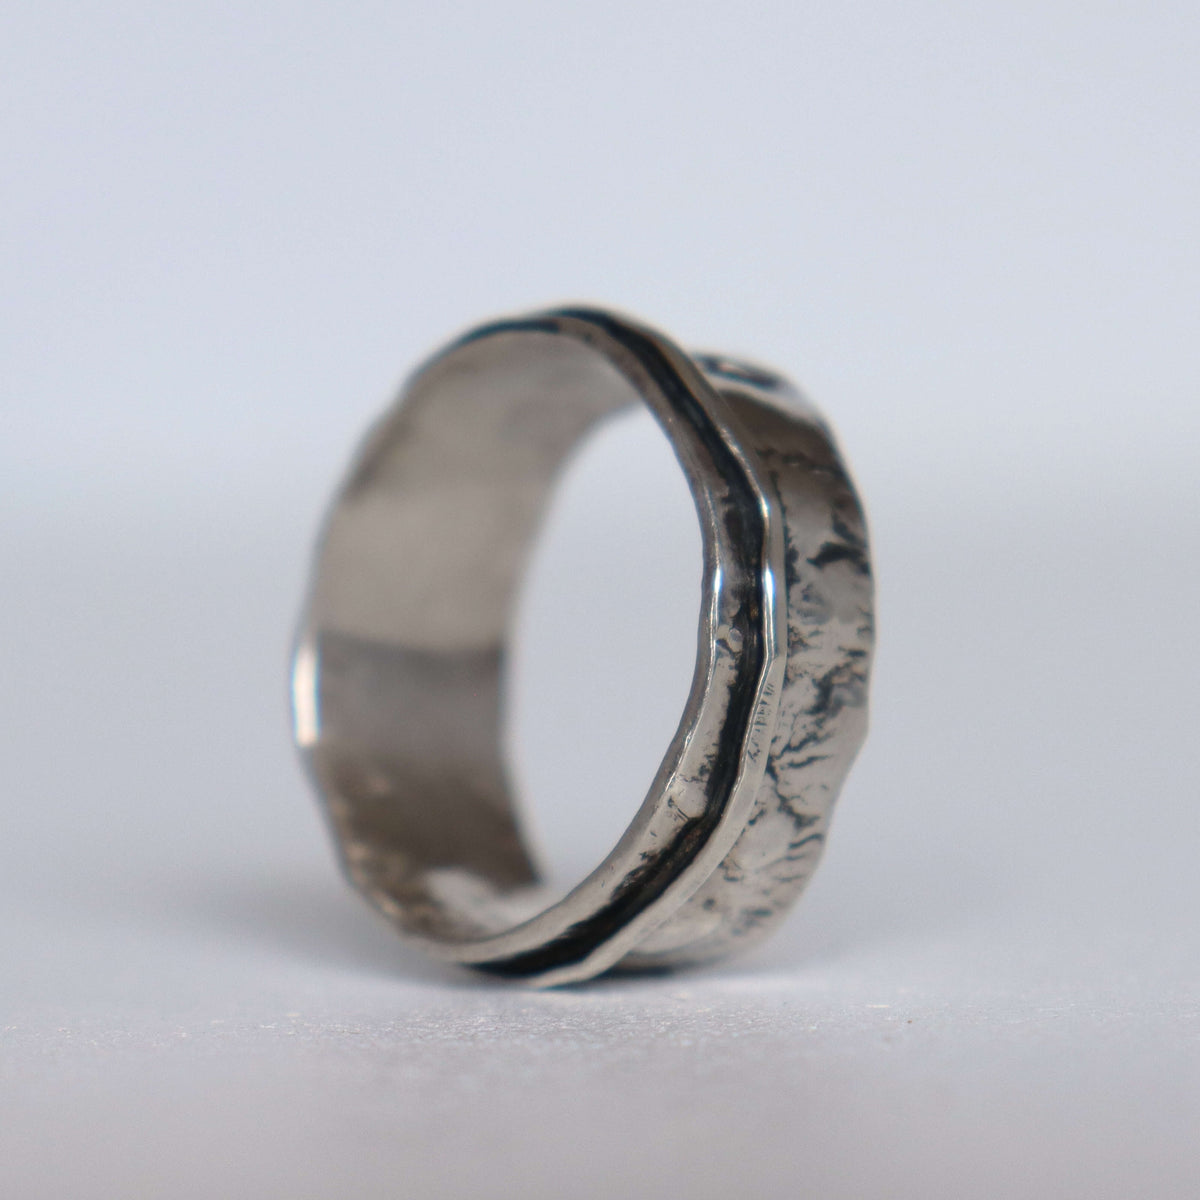 Men's ring in sterling silver, handmade with rough texture and oxidized silver. Handmade by roff